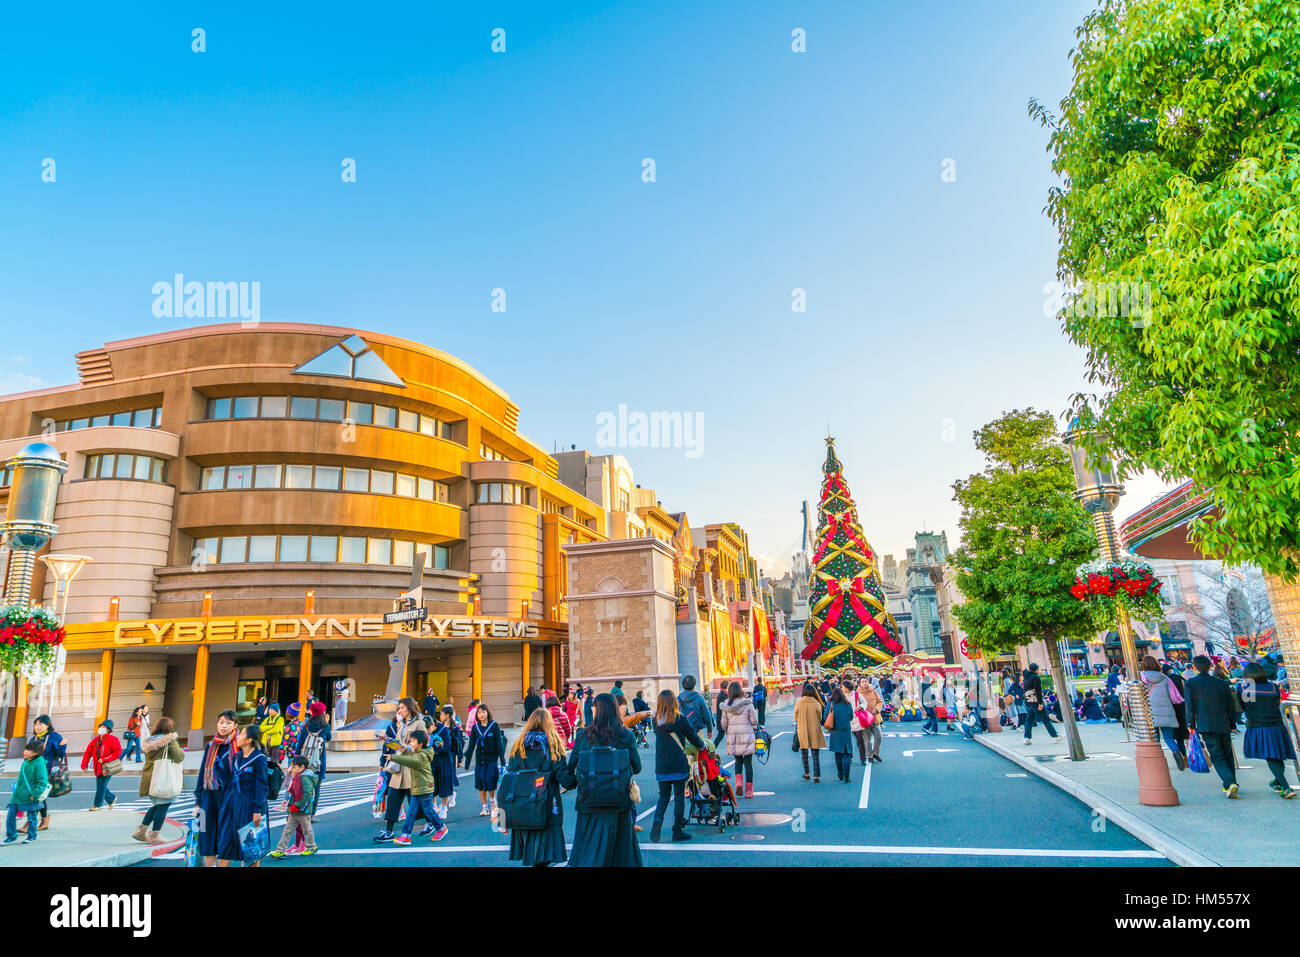 Osaka, Japan - 1 December 2015: The theme park attractions based on the film industry at Universal Studios Theme Park in Osaka, Japan on christmas cel Stock Photo